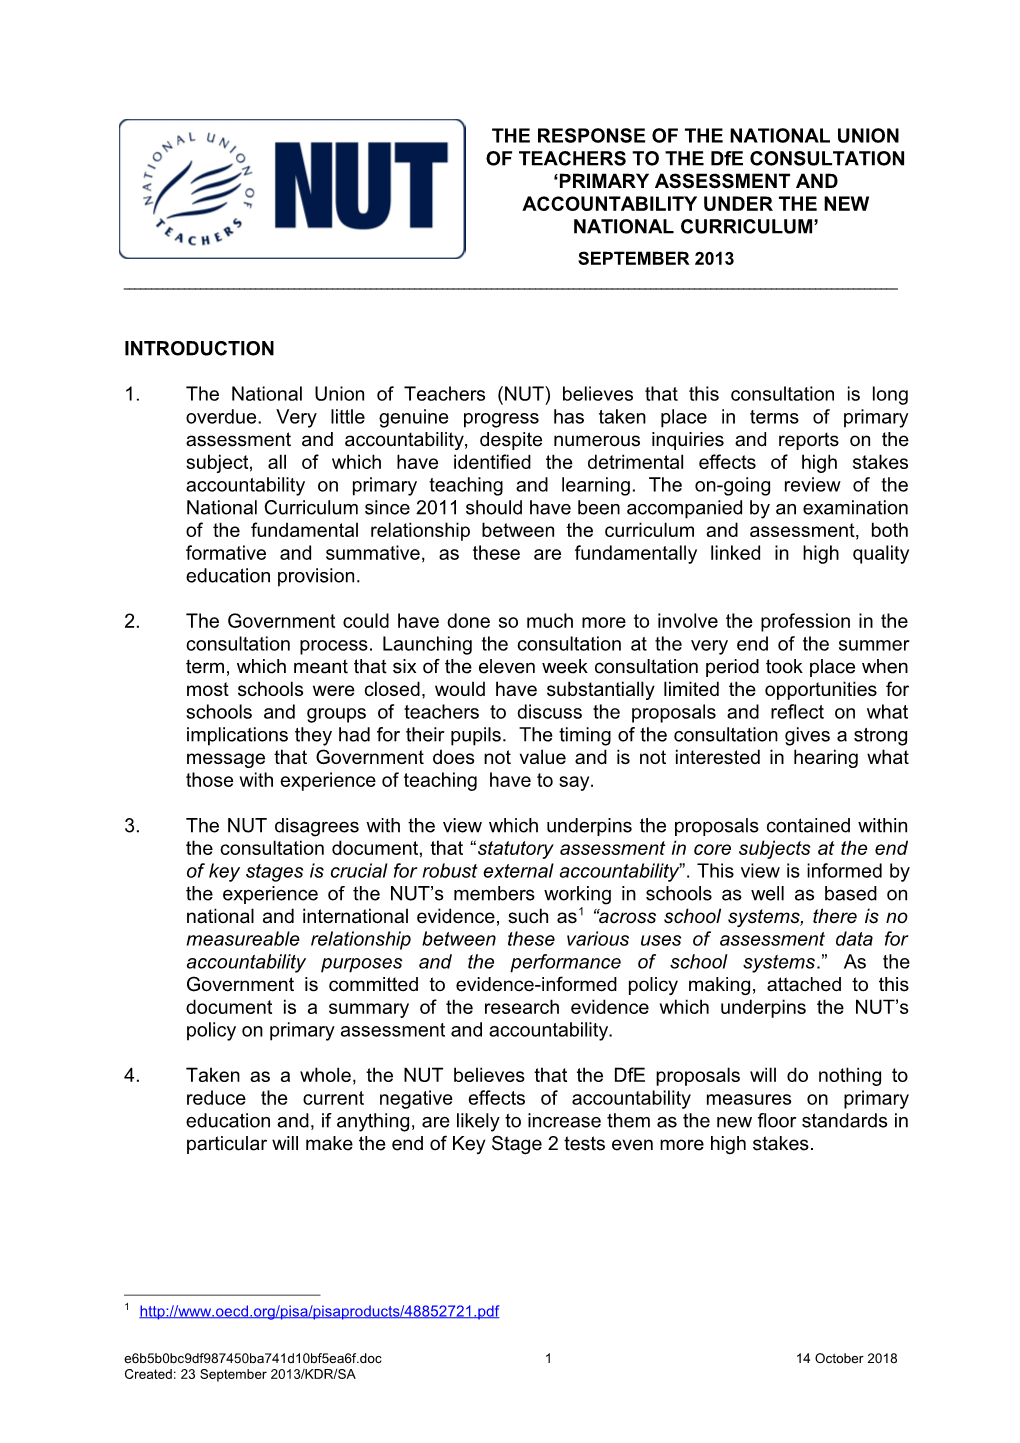 THE RESPONSE of the NATIONAL UNION of TEACHERS to the Dfe CONSULTATION PRIMARY ASSESSMENT